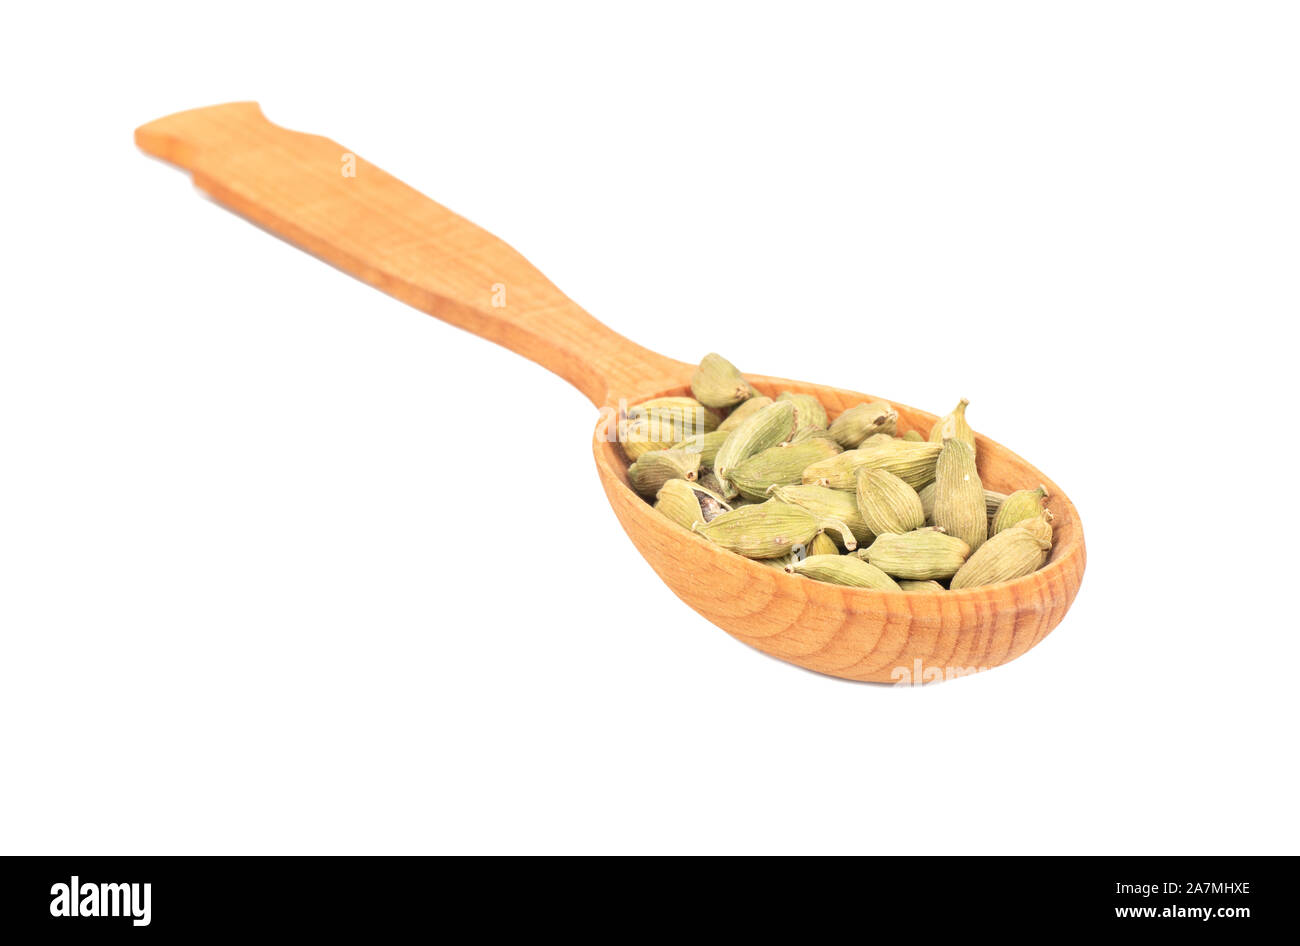 Dry cardamom in a large wooden spoon on a white background Stock Photo